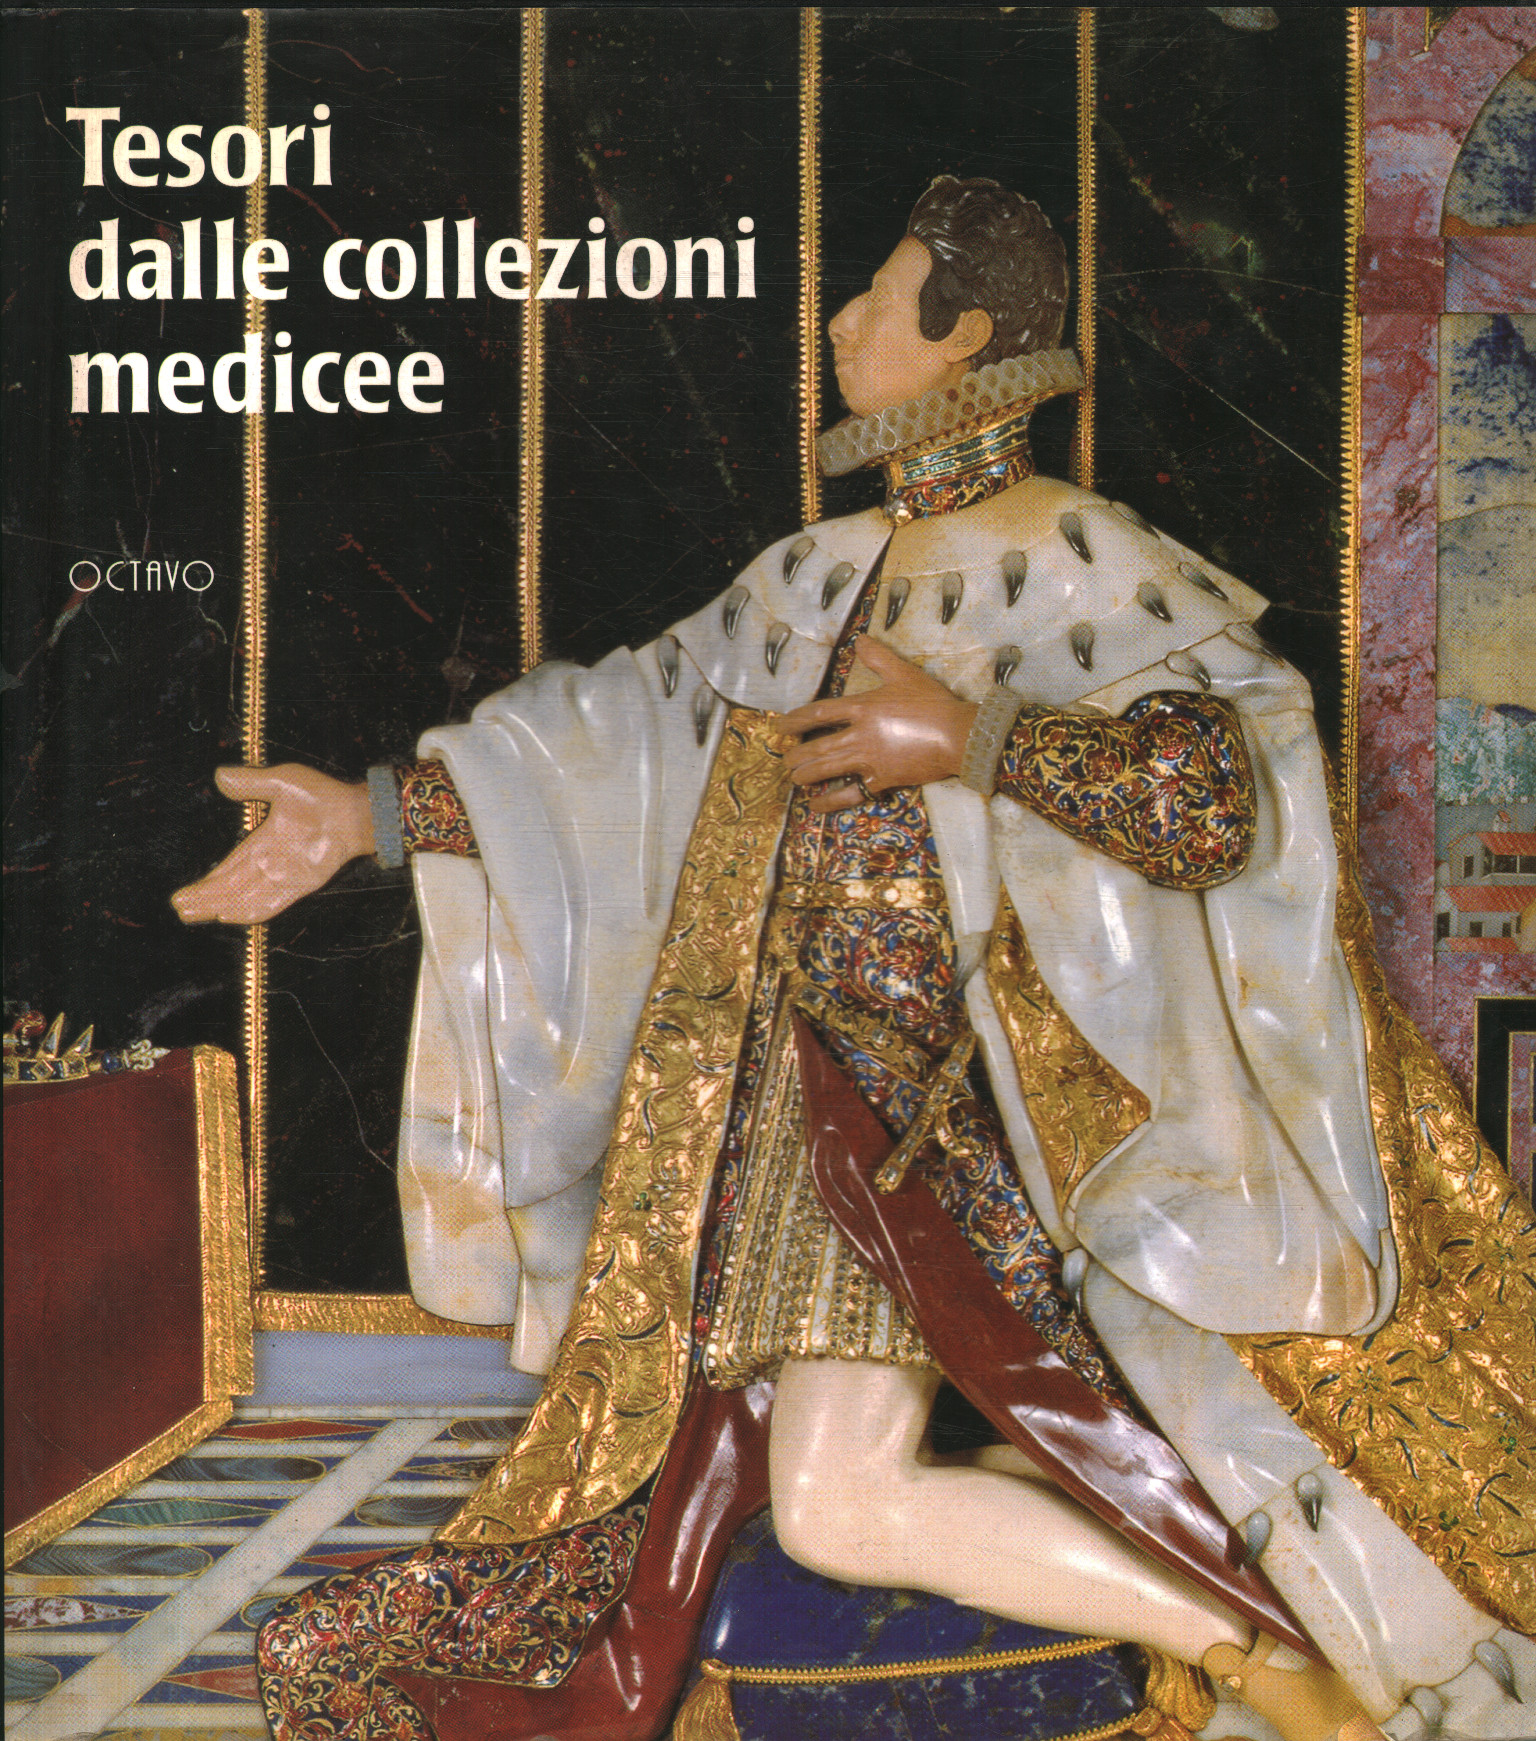 Treasures from the Medici collections